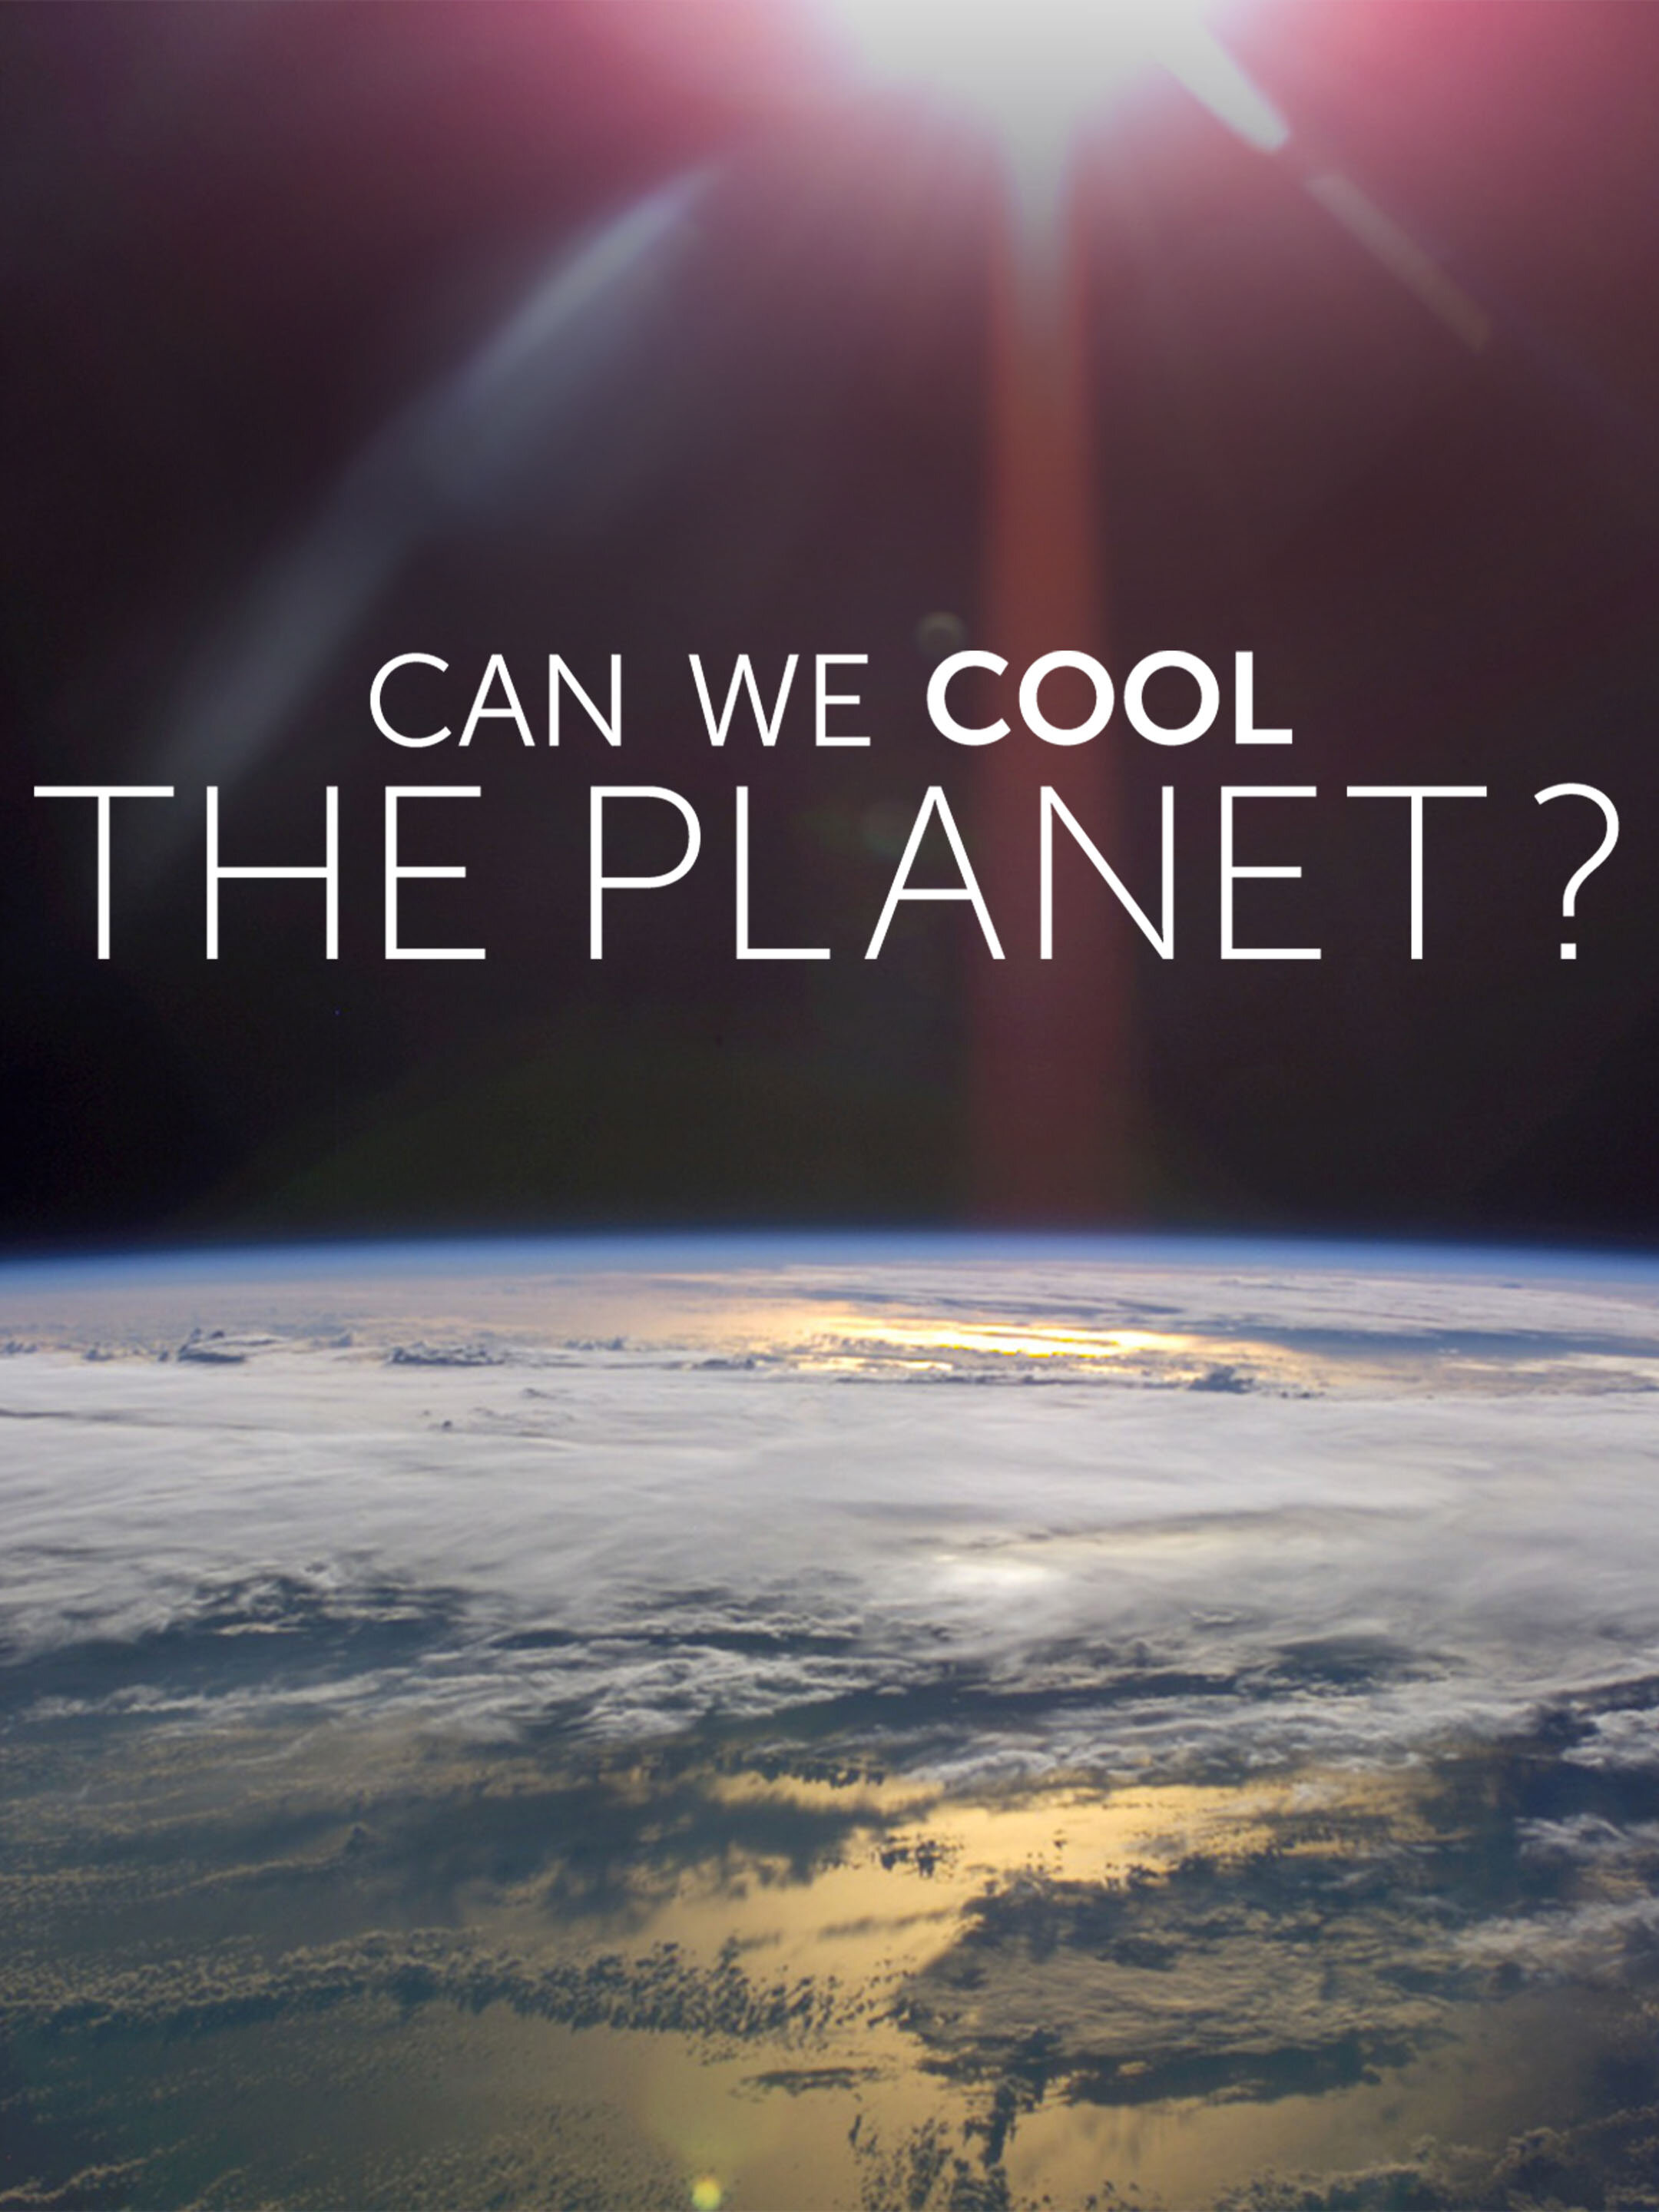 Image courtesy of Can We Cool The Planet.